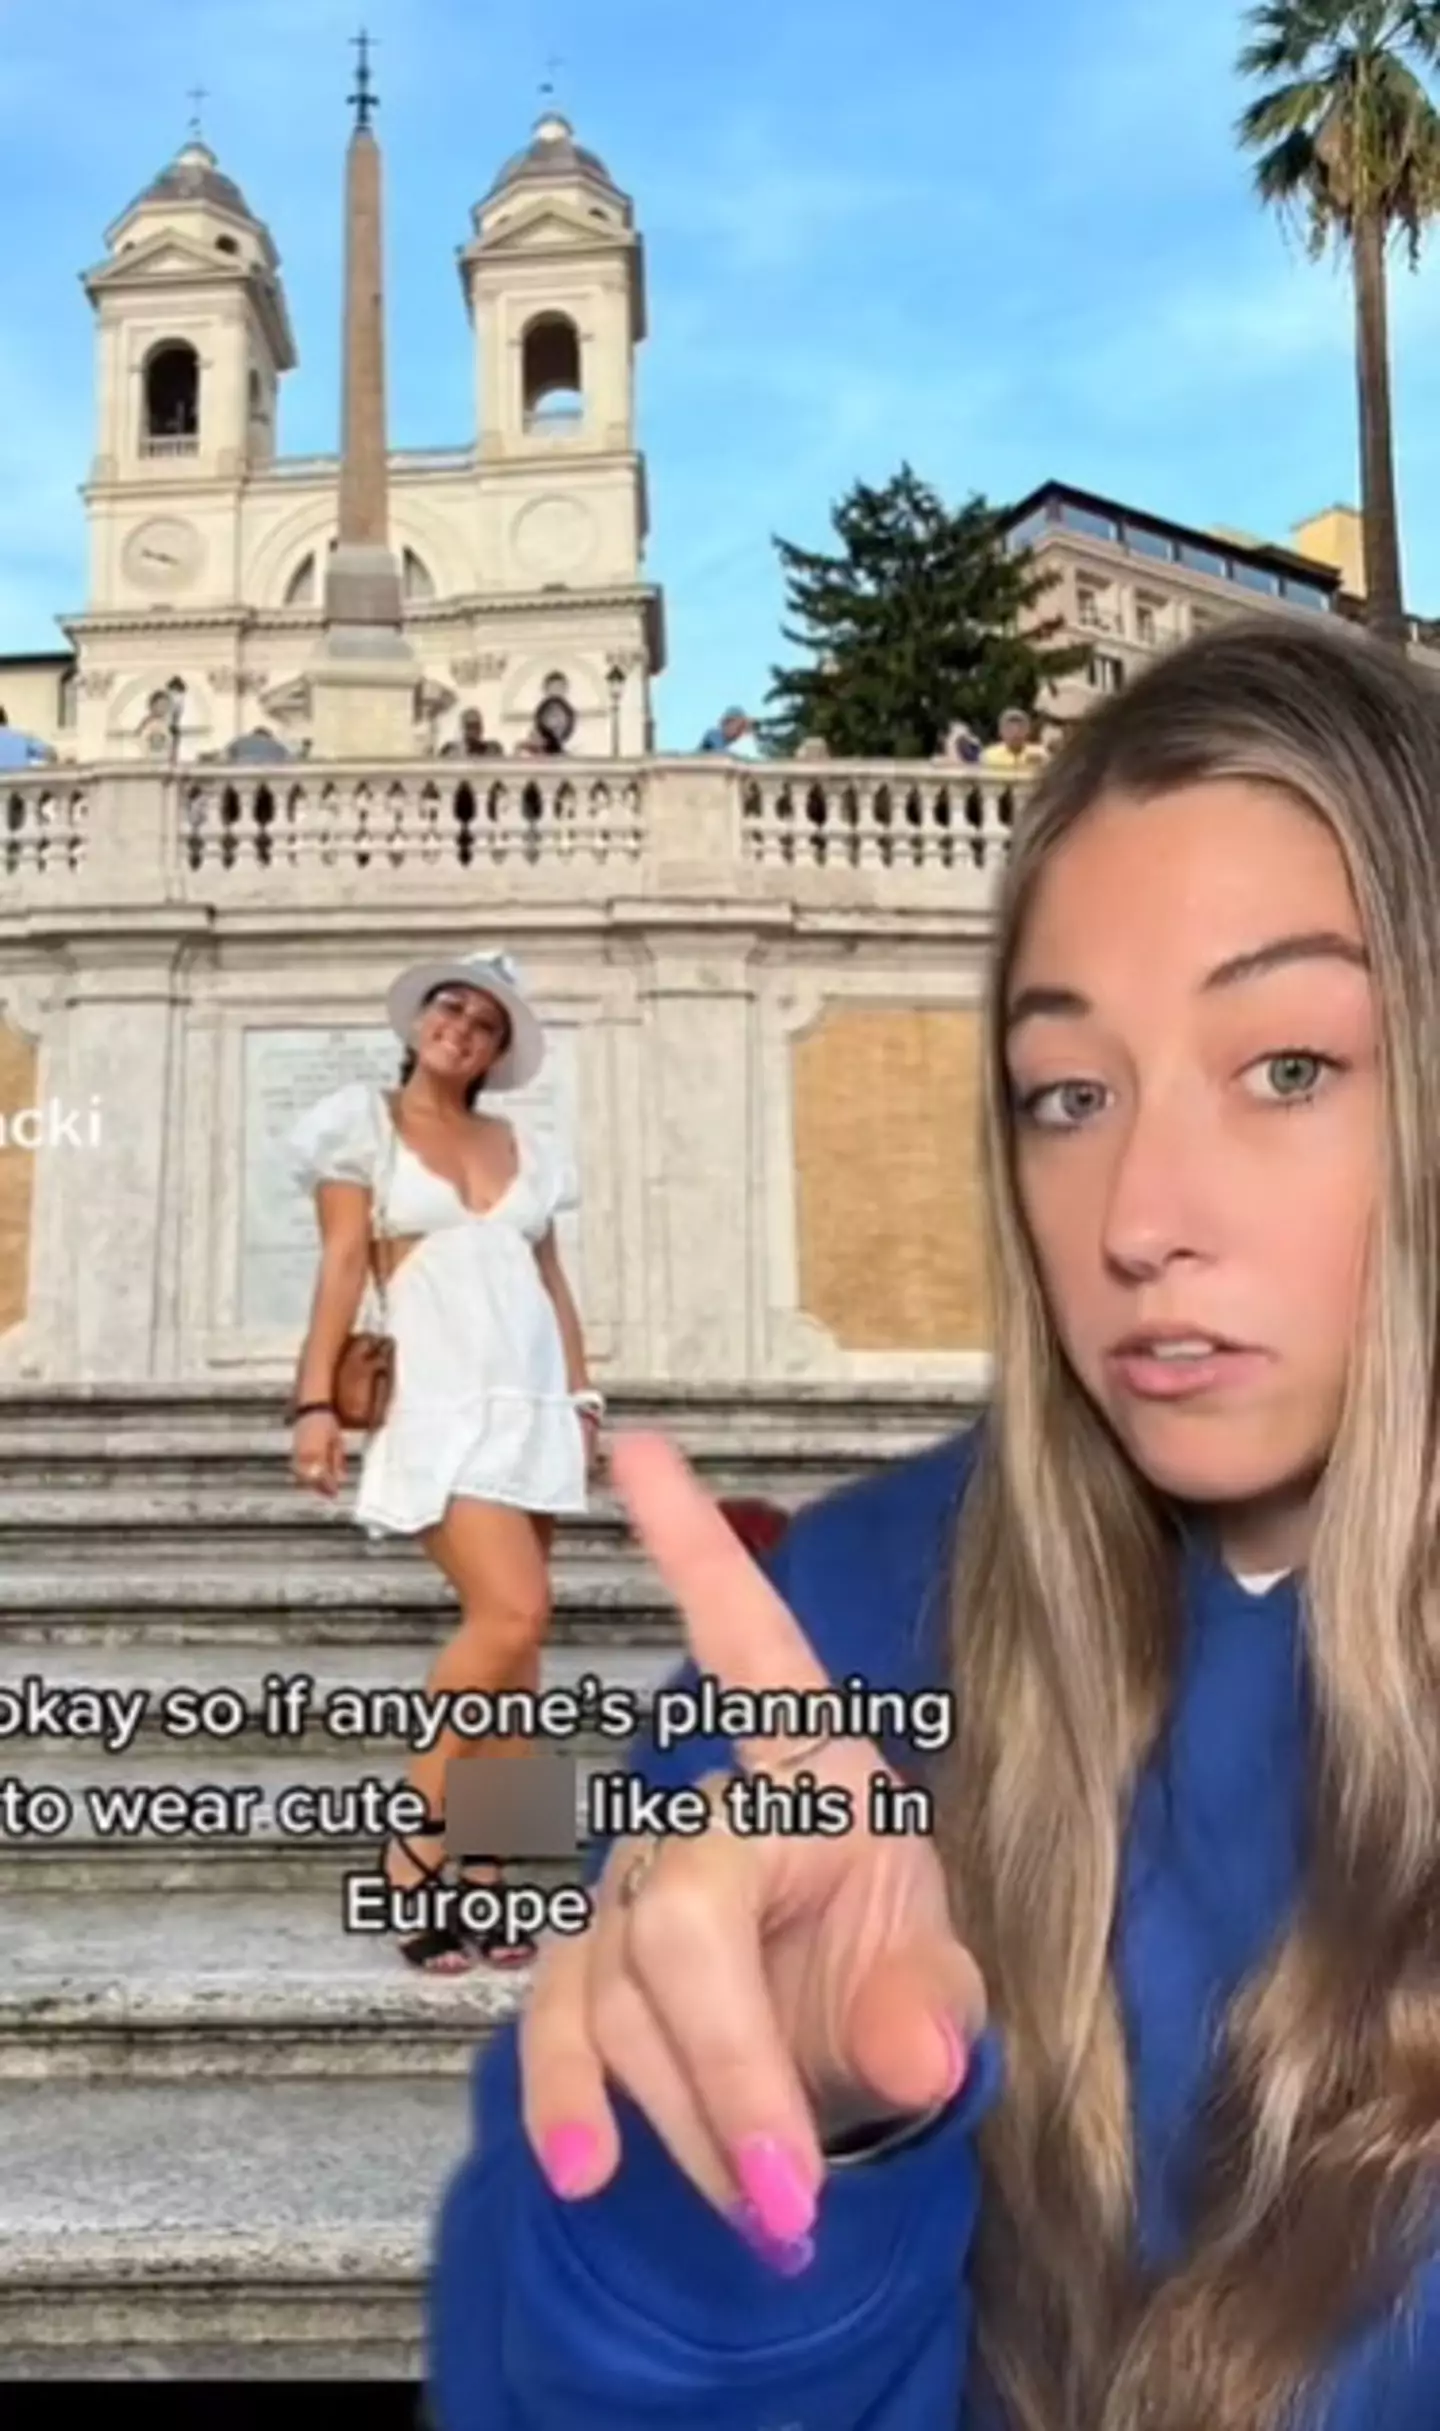 Jacki Hodge shared tips about how to dress when visiting Rome.